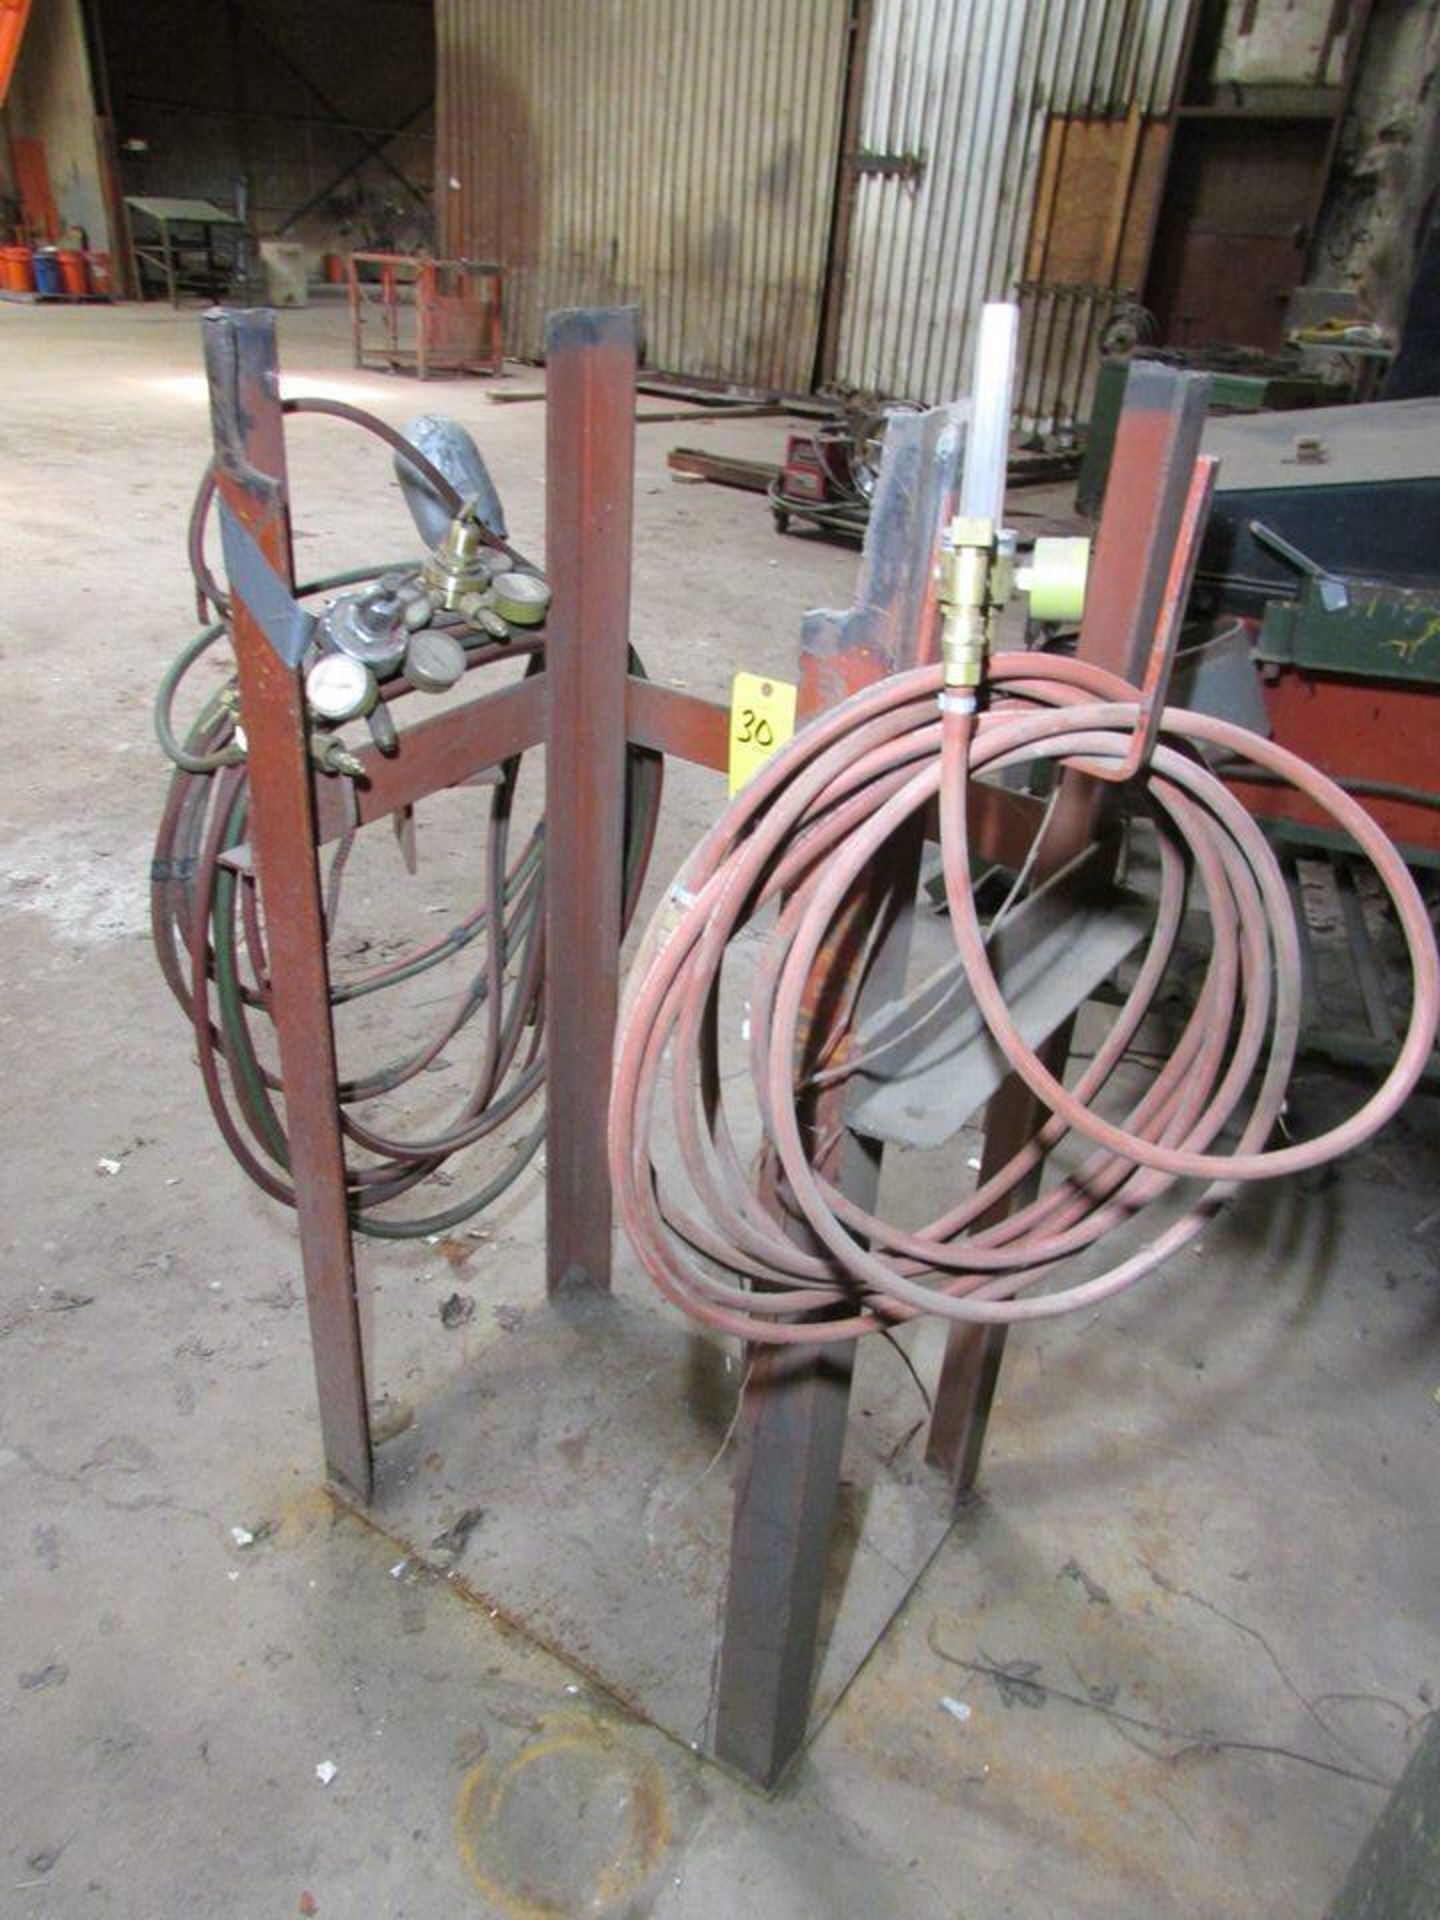 (2) Oxy Acetylene Cylinder Torch Racks; With Torch Hose, (7) Pressure Regulators and (4) Torches (